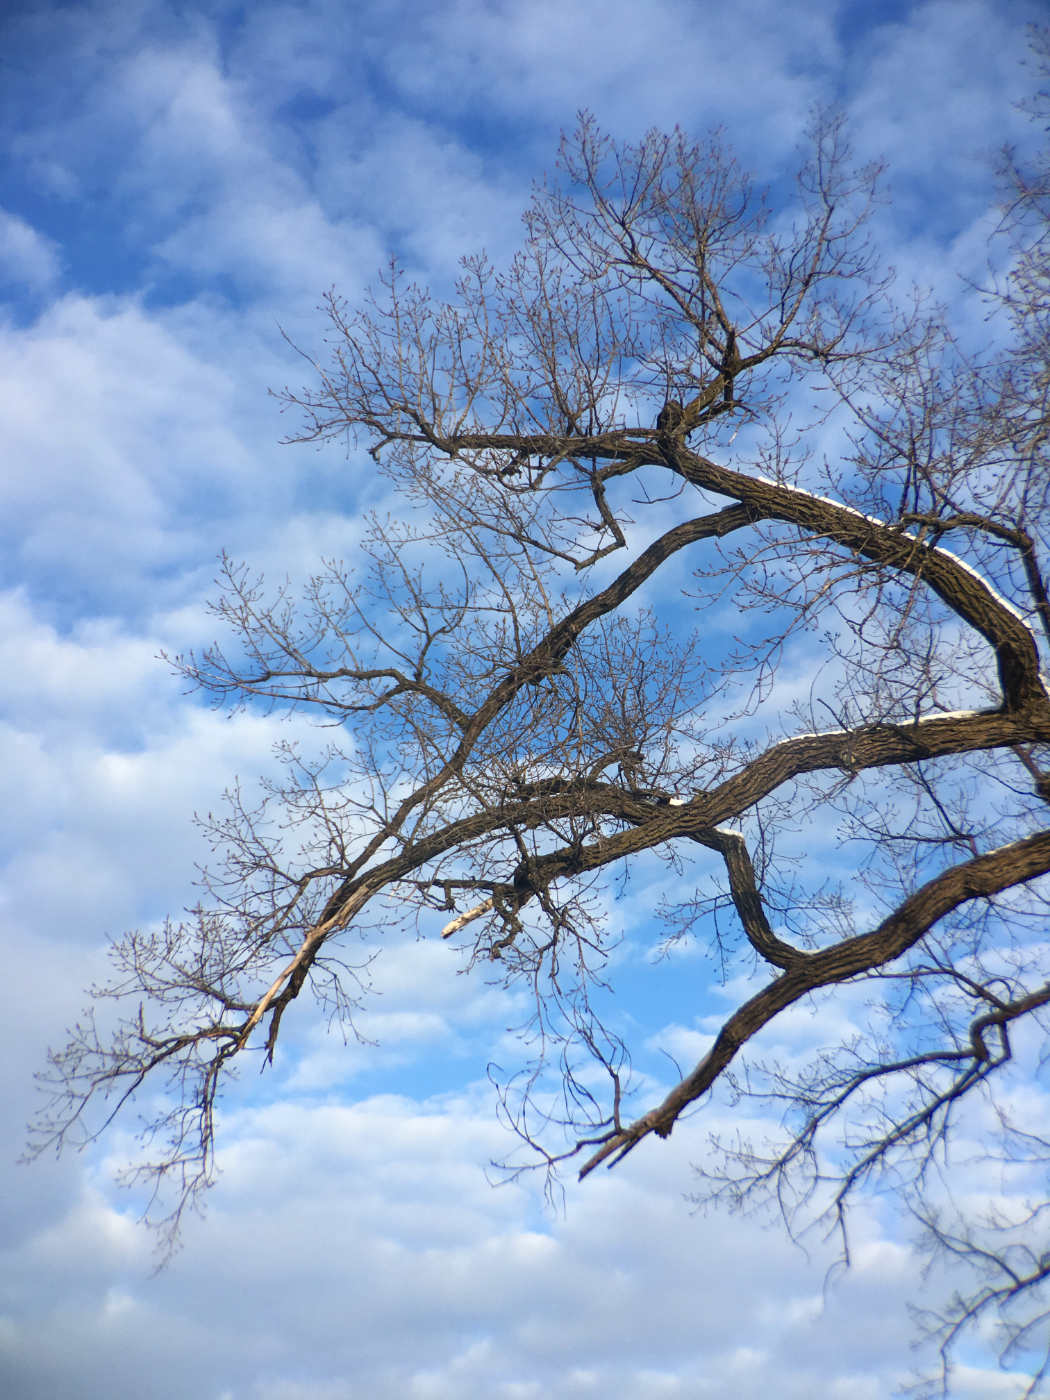 oak boughs against a blue sky with some clouds